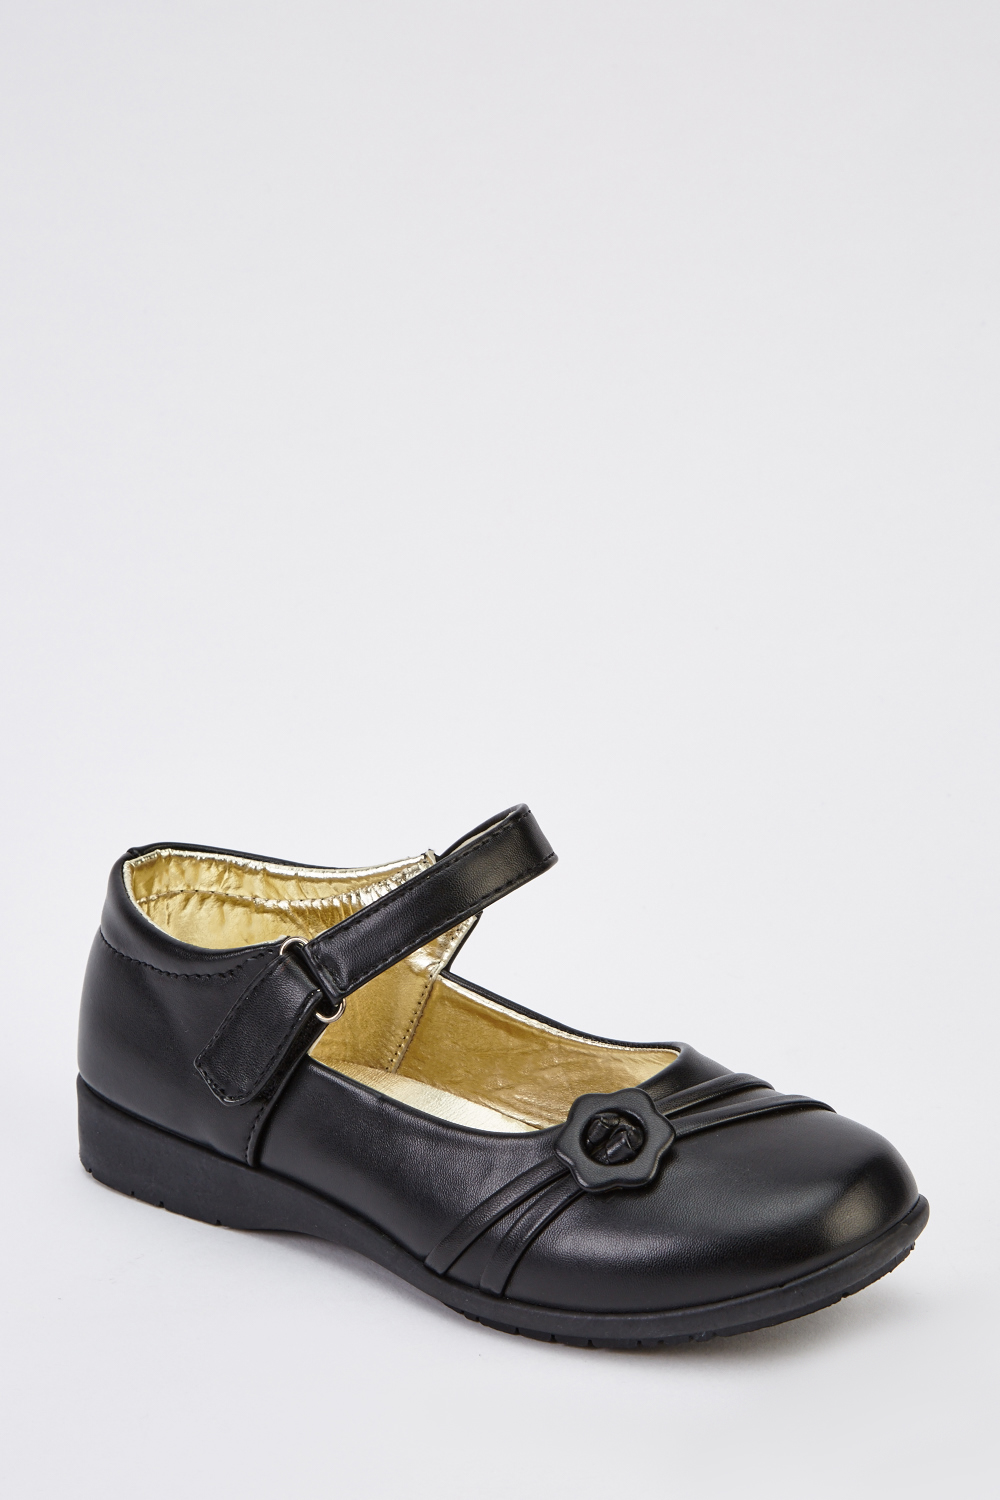 ladies black dolly shoes